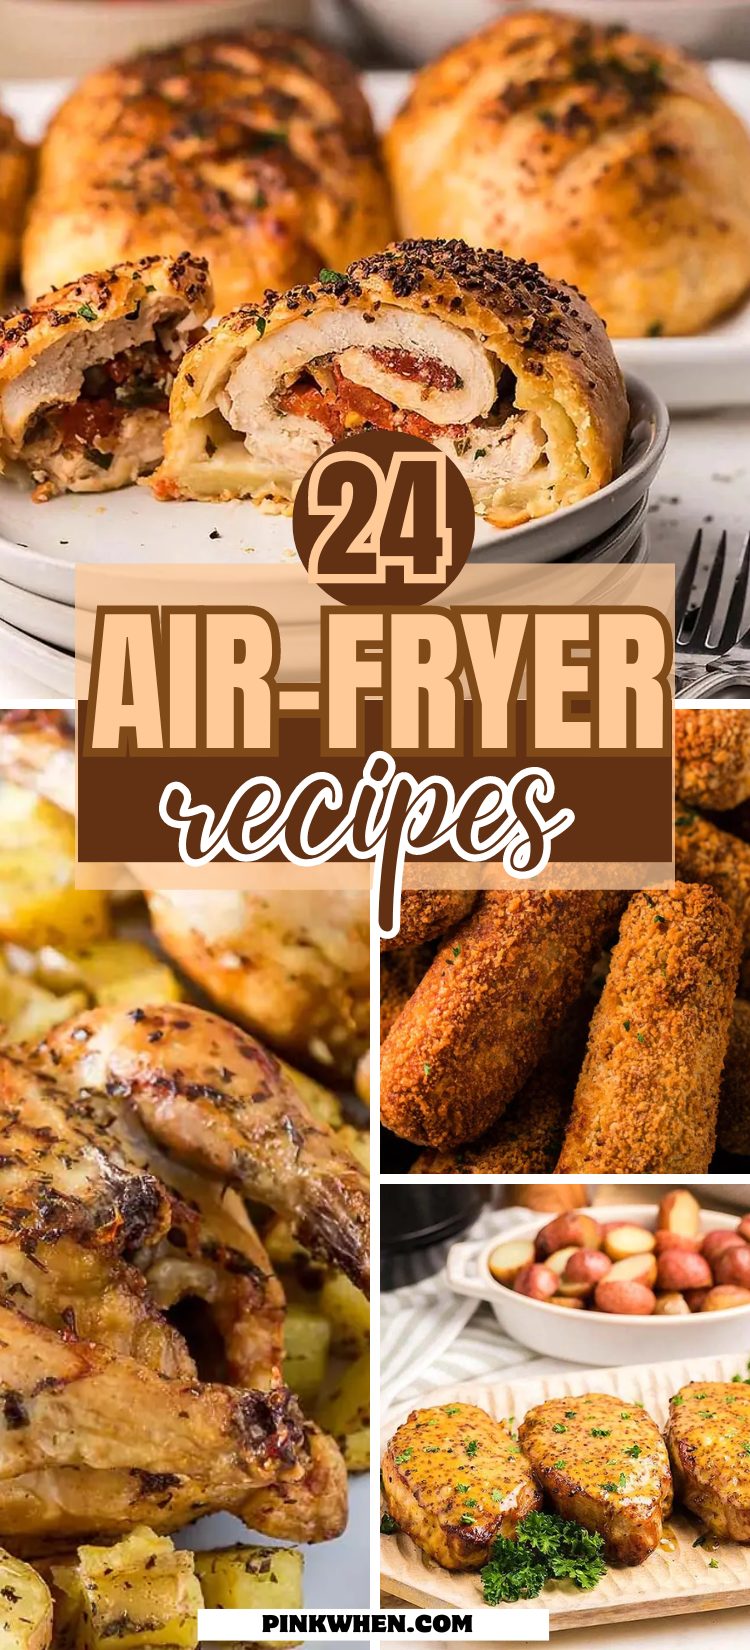 30 Air Fryer Recipes to Make on Repeat